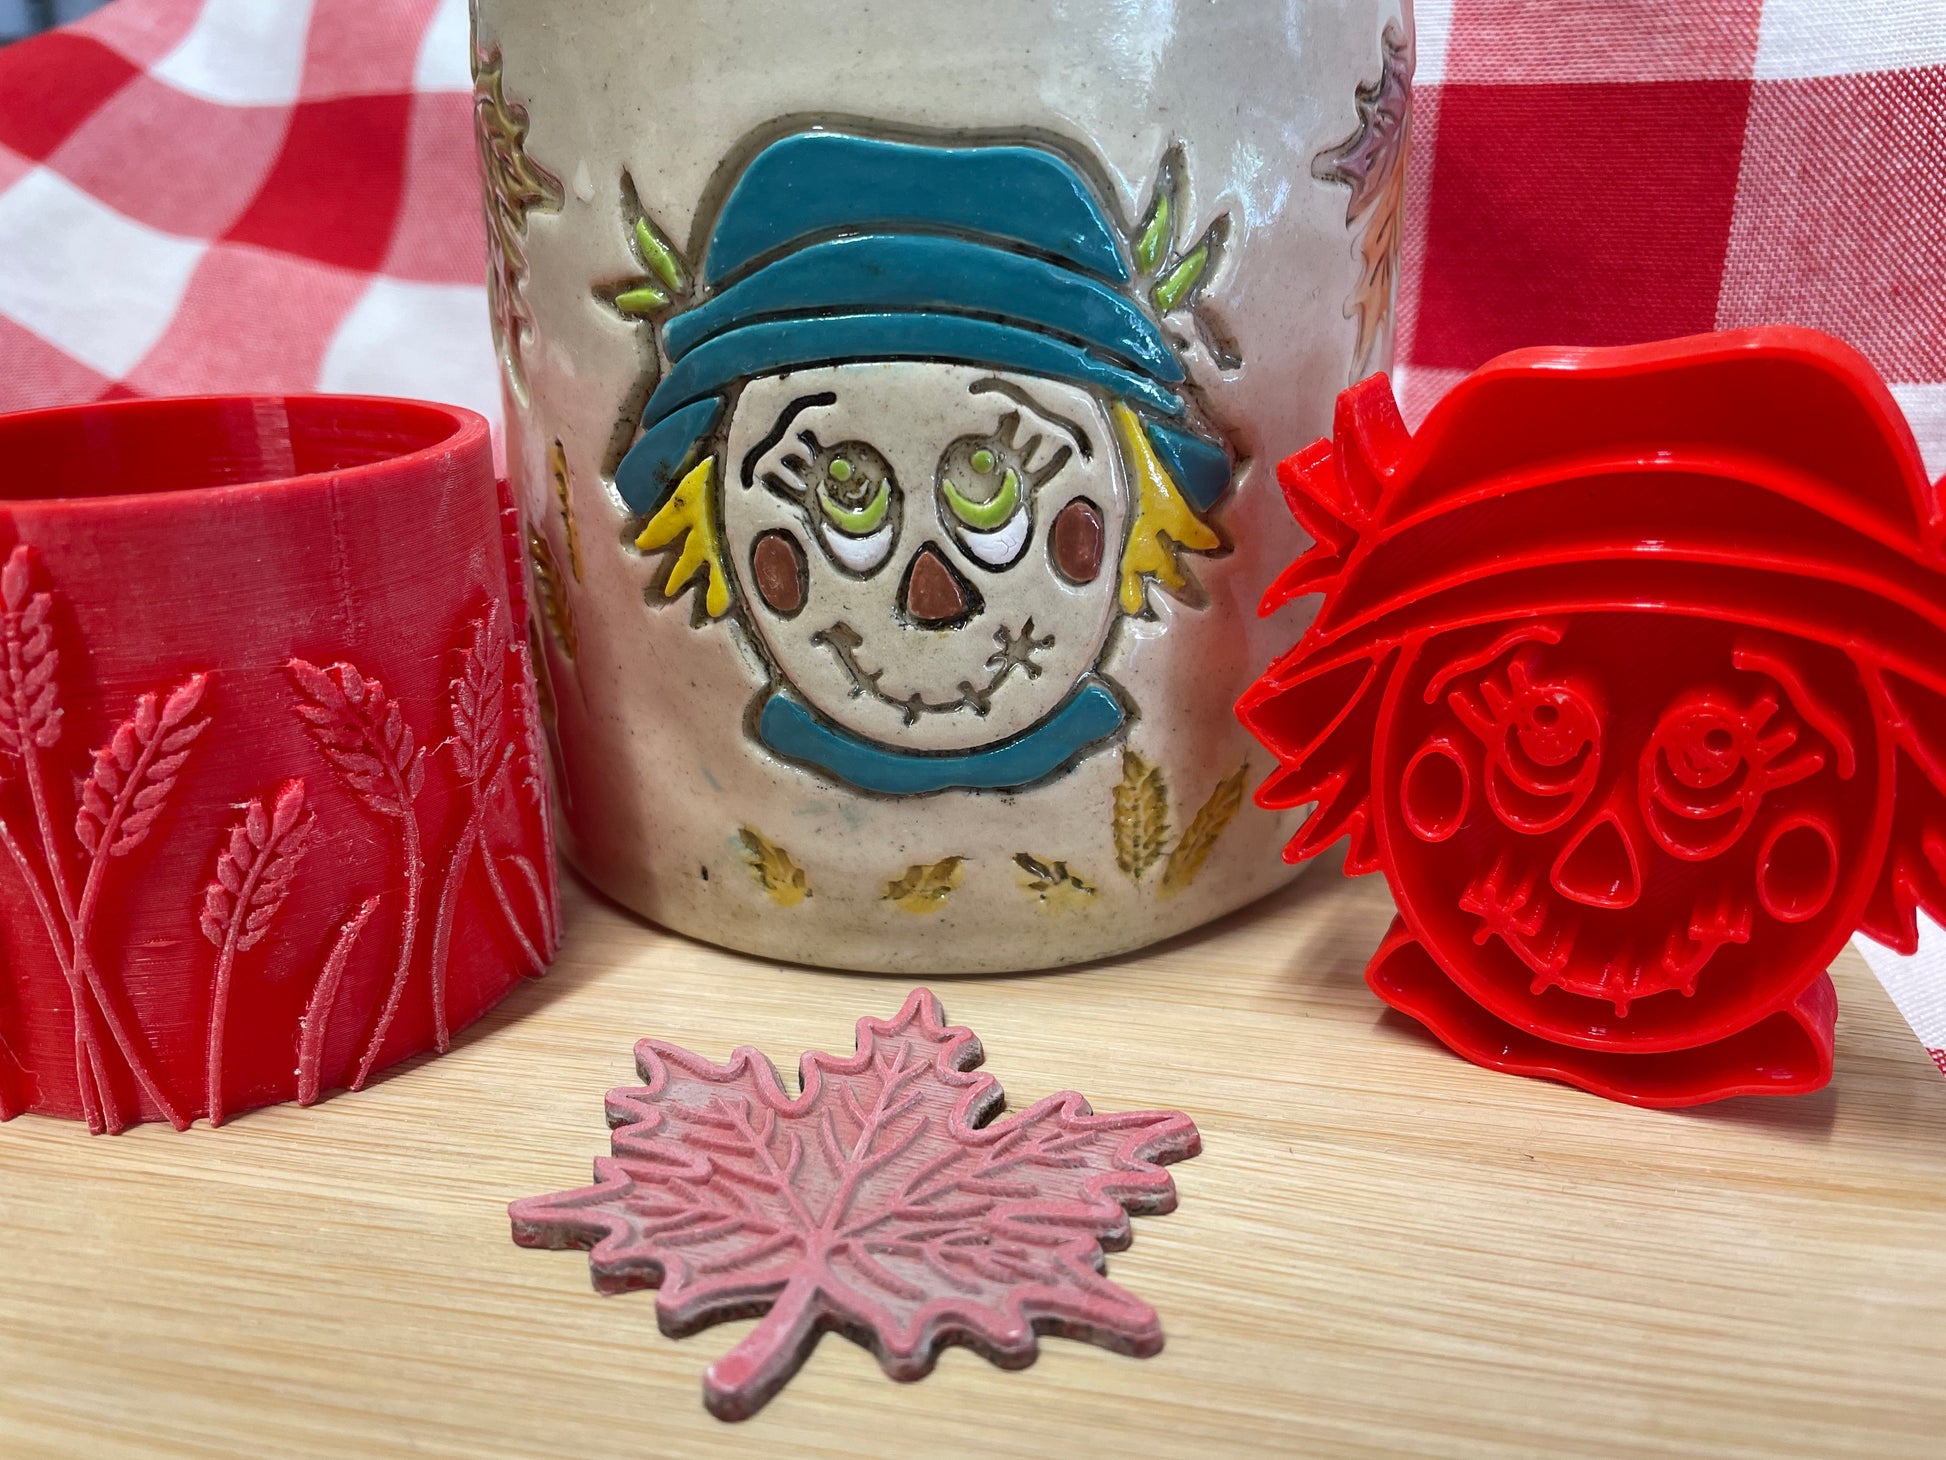 Stamps for clay decorating - The Ceramic Shop